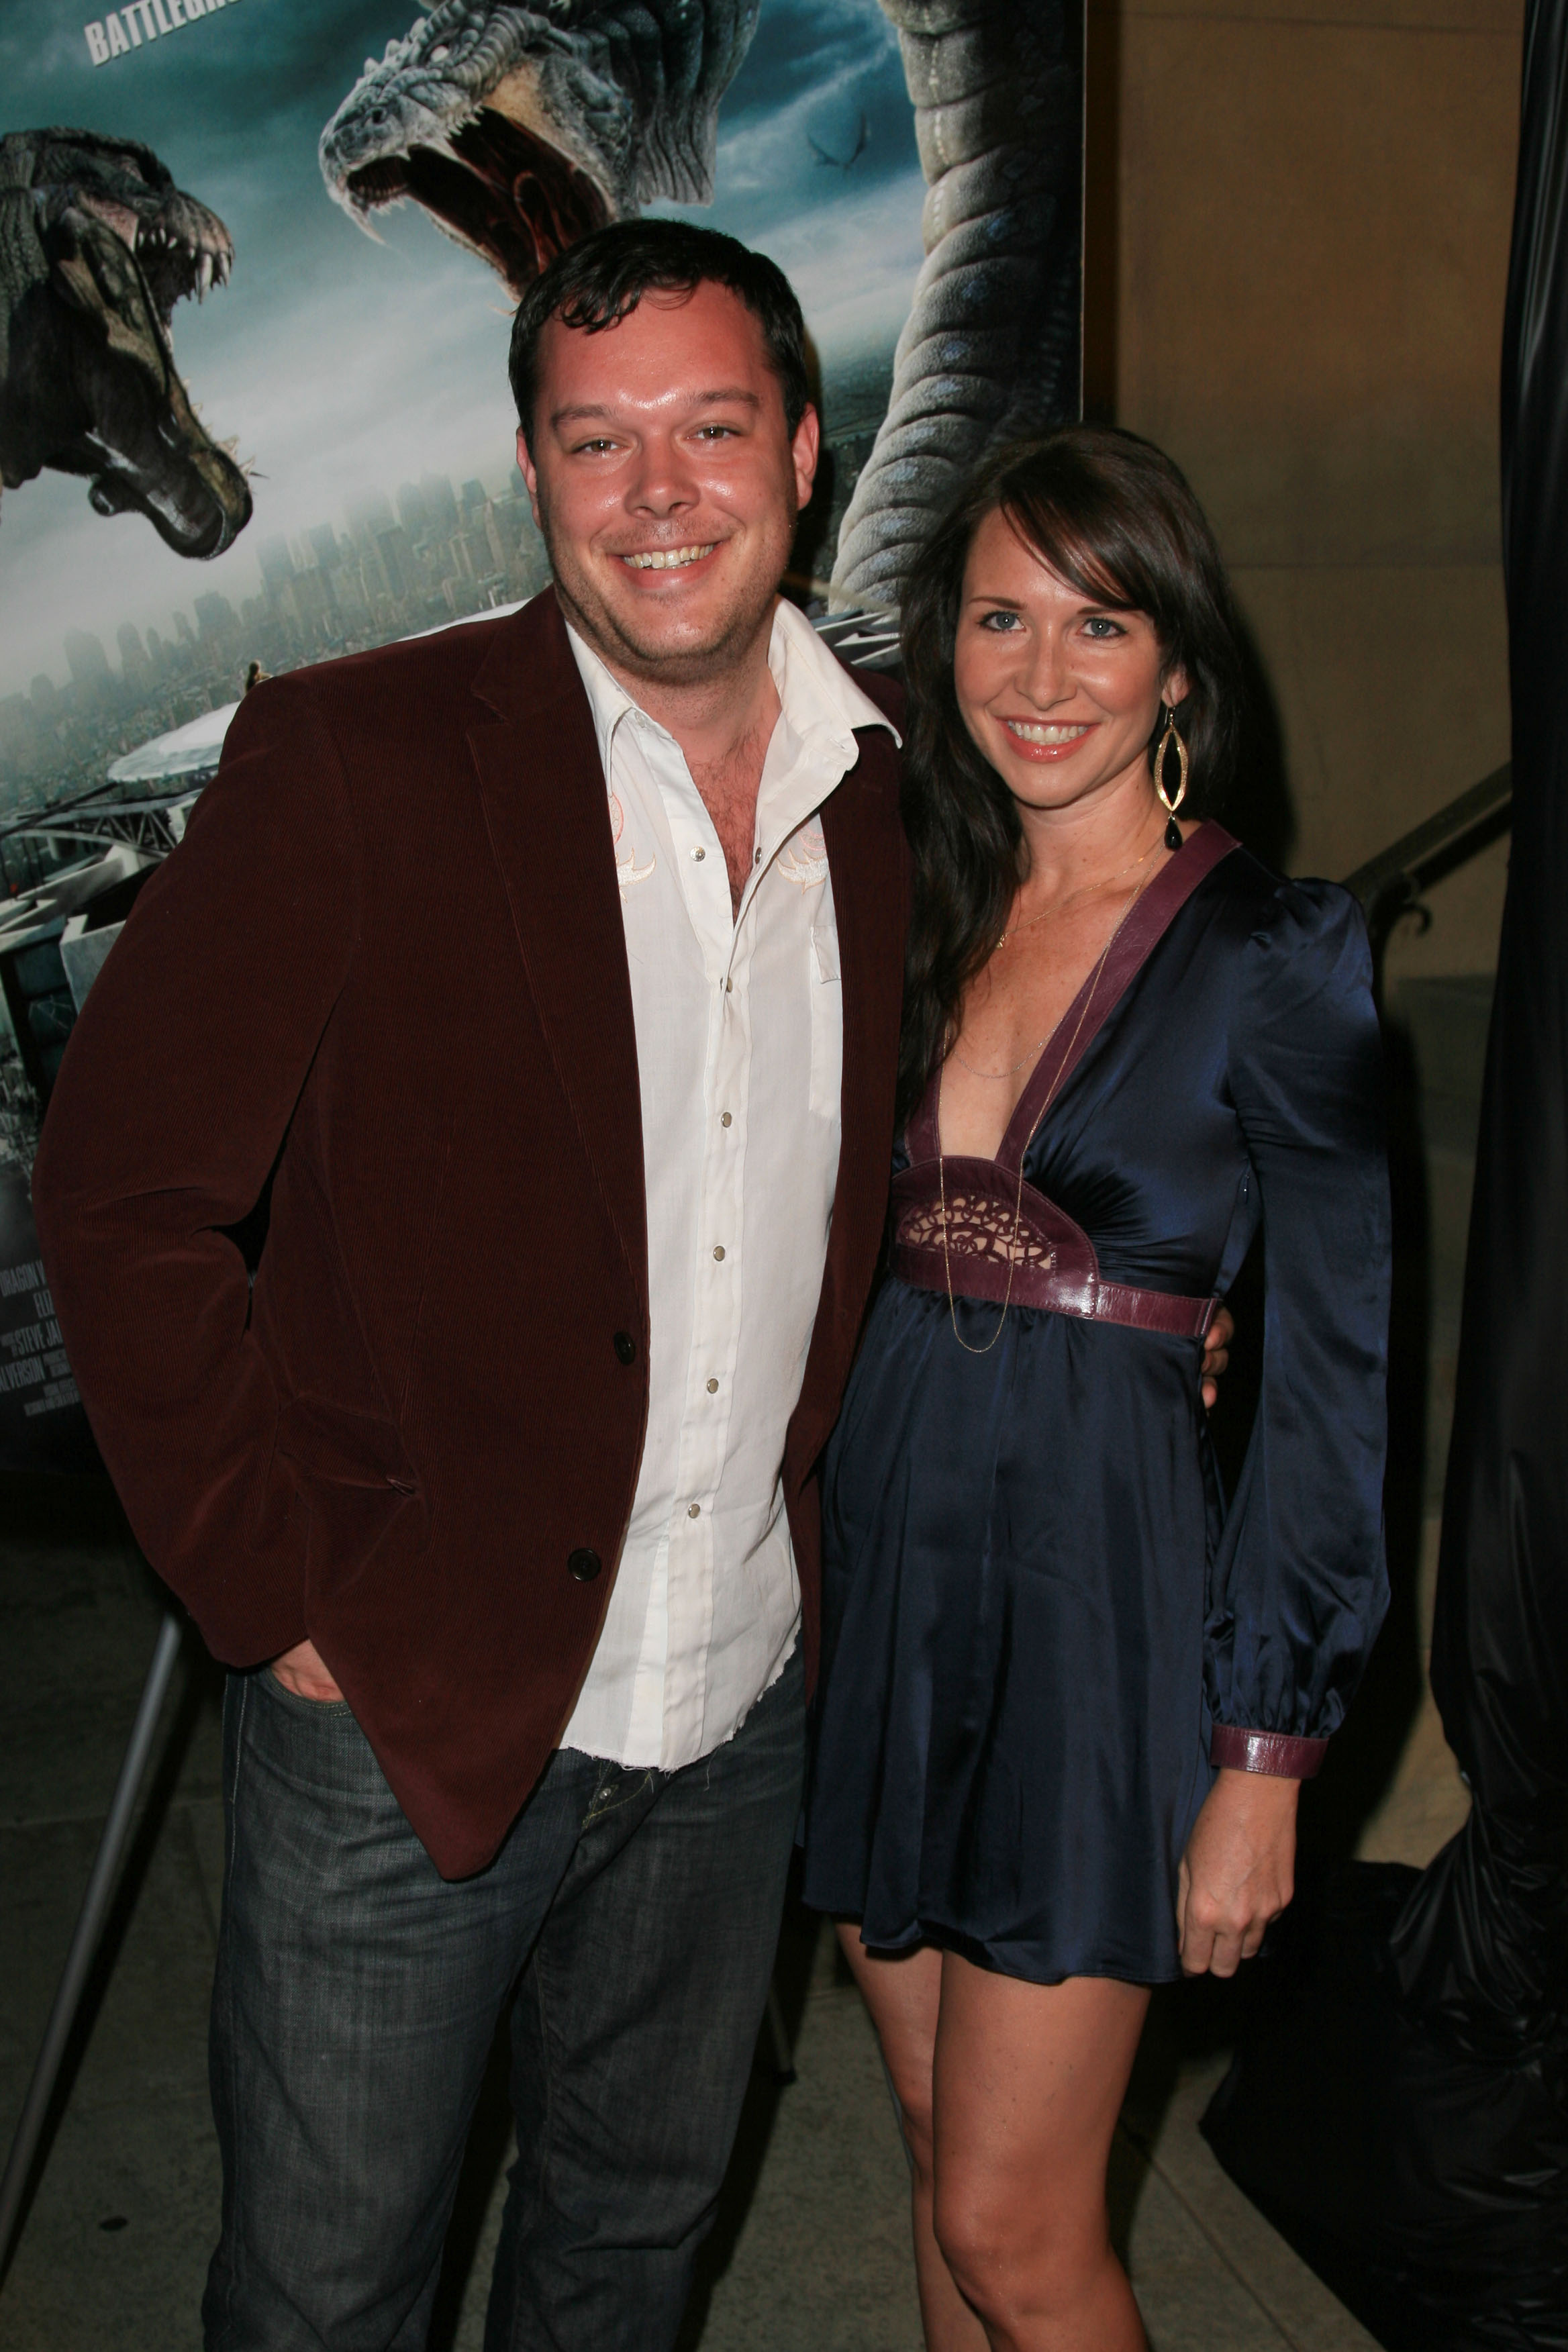 Premiere of Dragon Wars with actor Michael Gladis